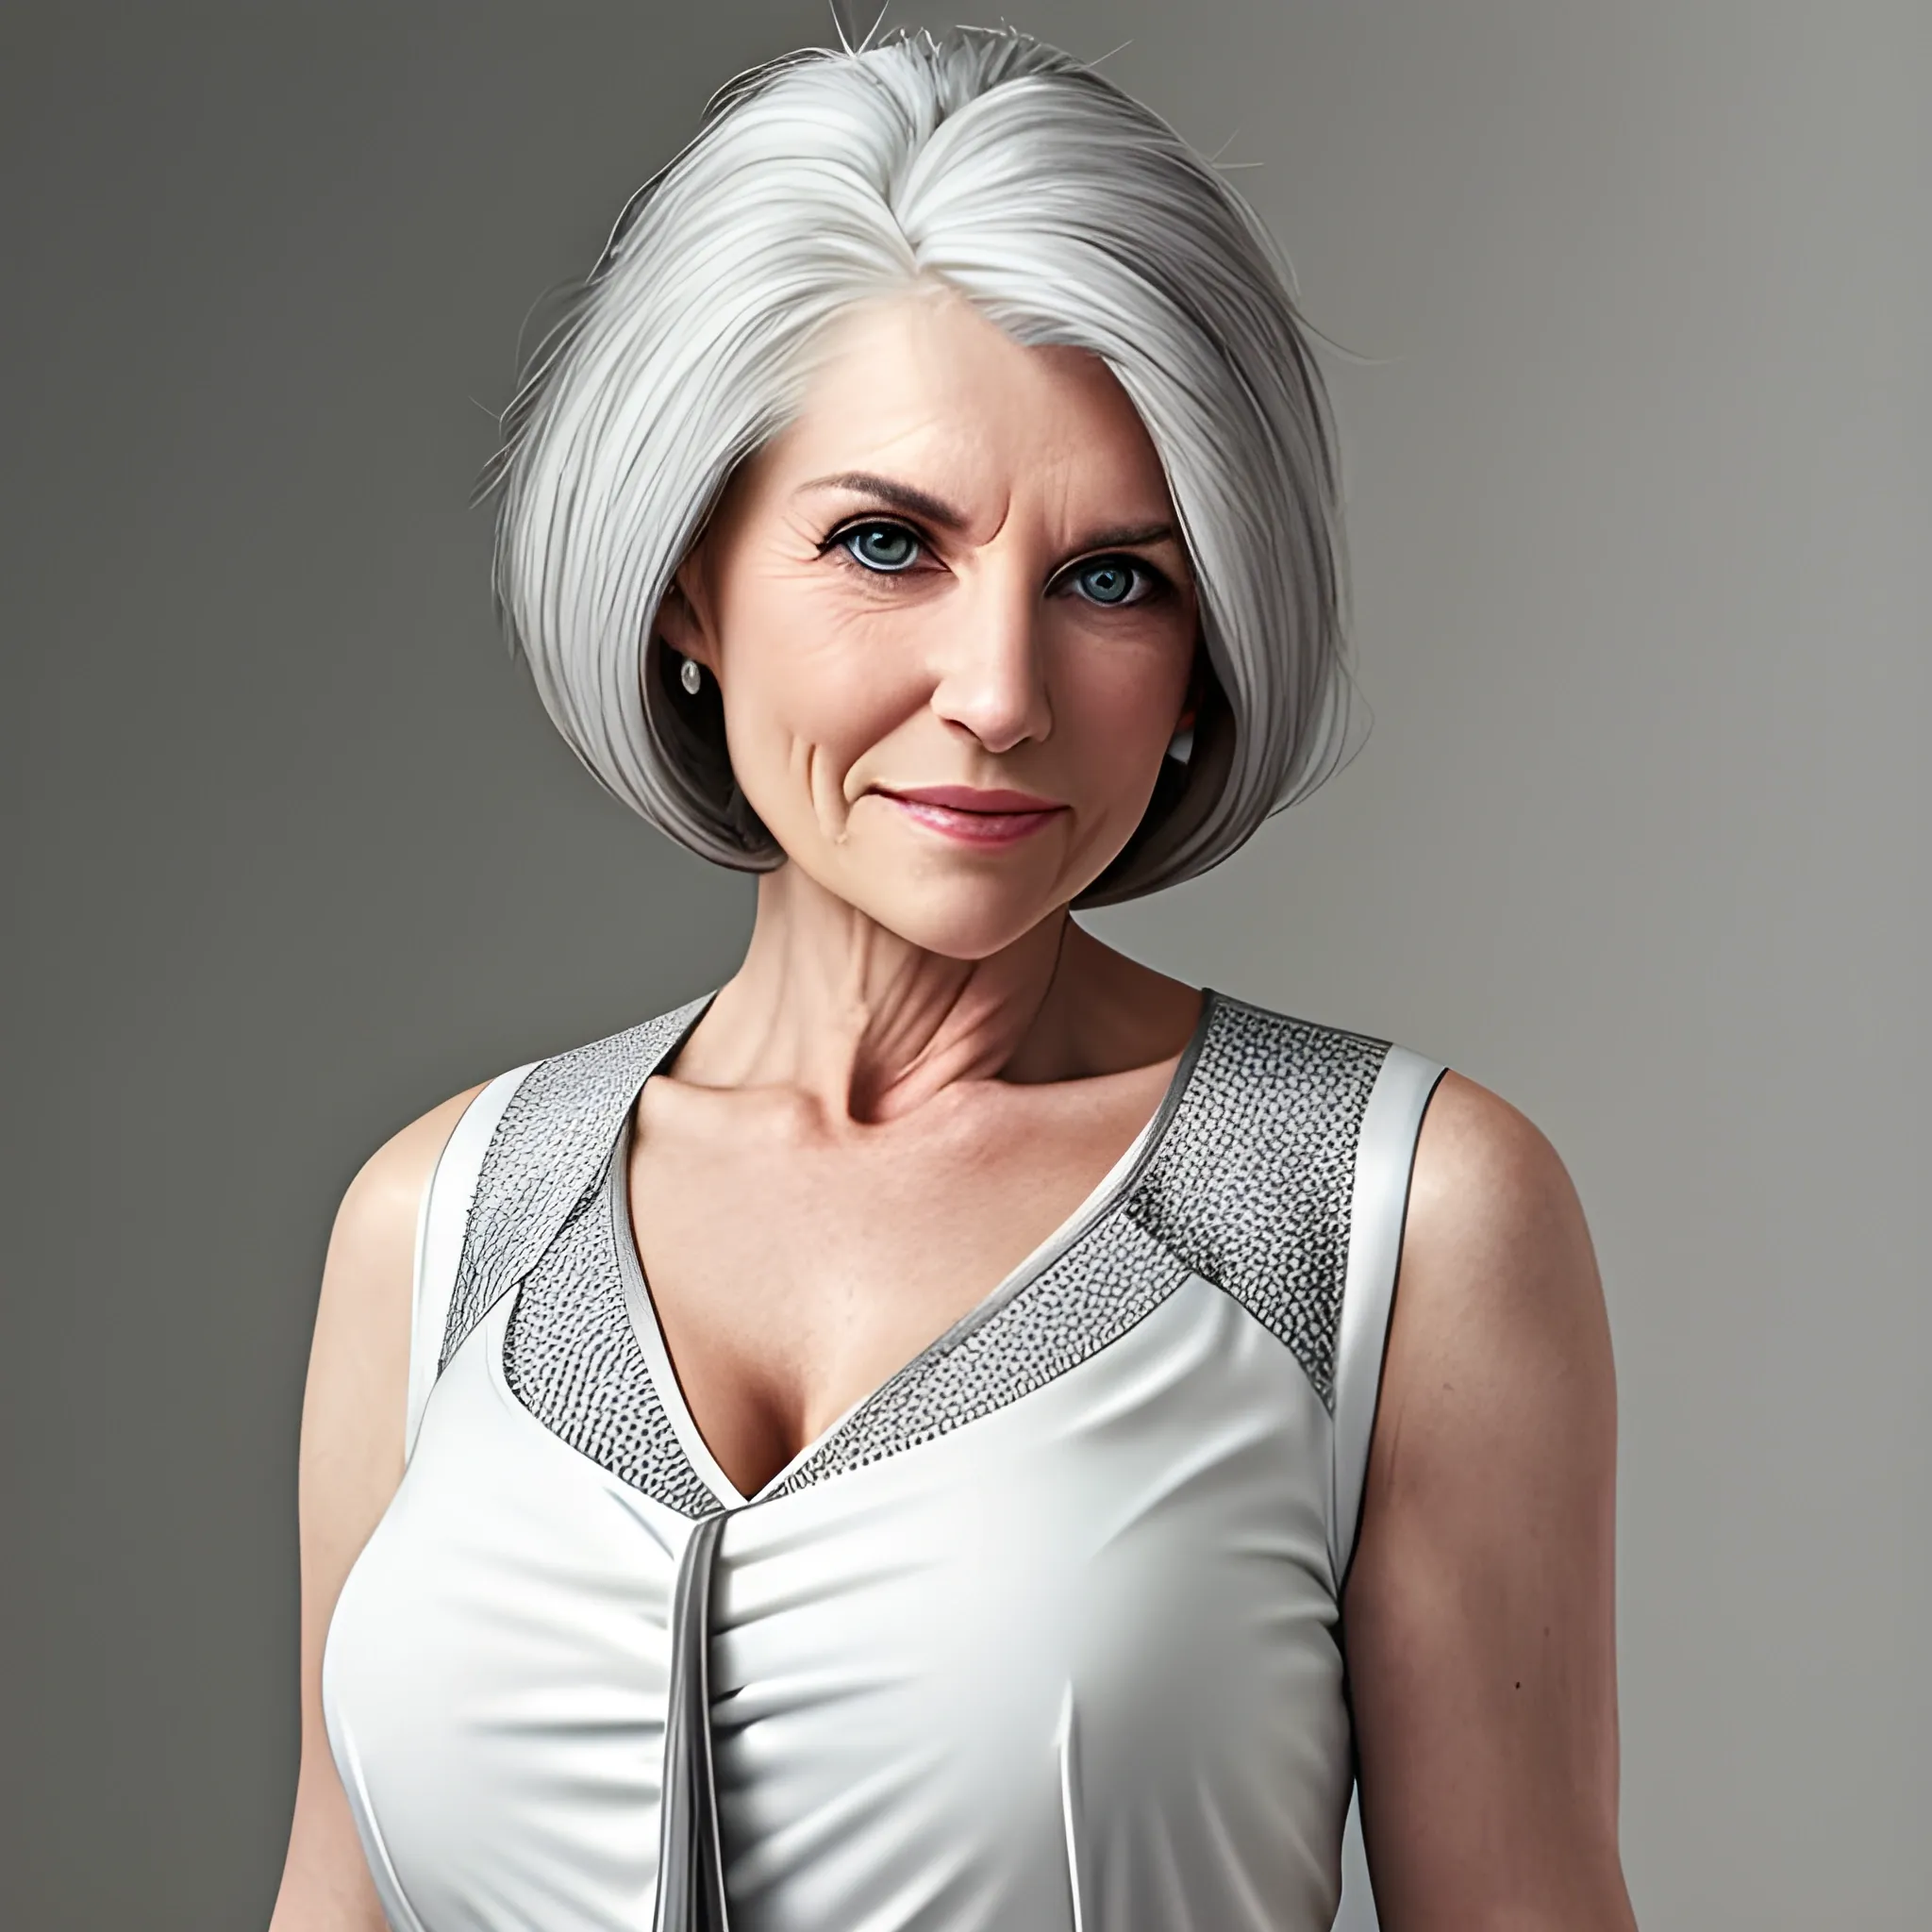 White and Gray haired woman with top heavy chest in a low cut form fitting blouse